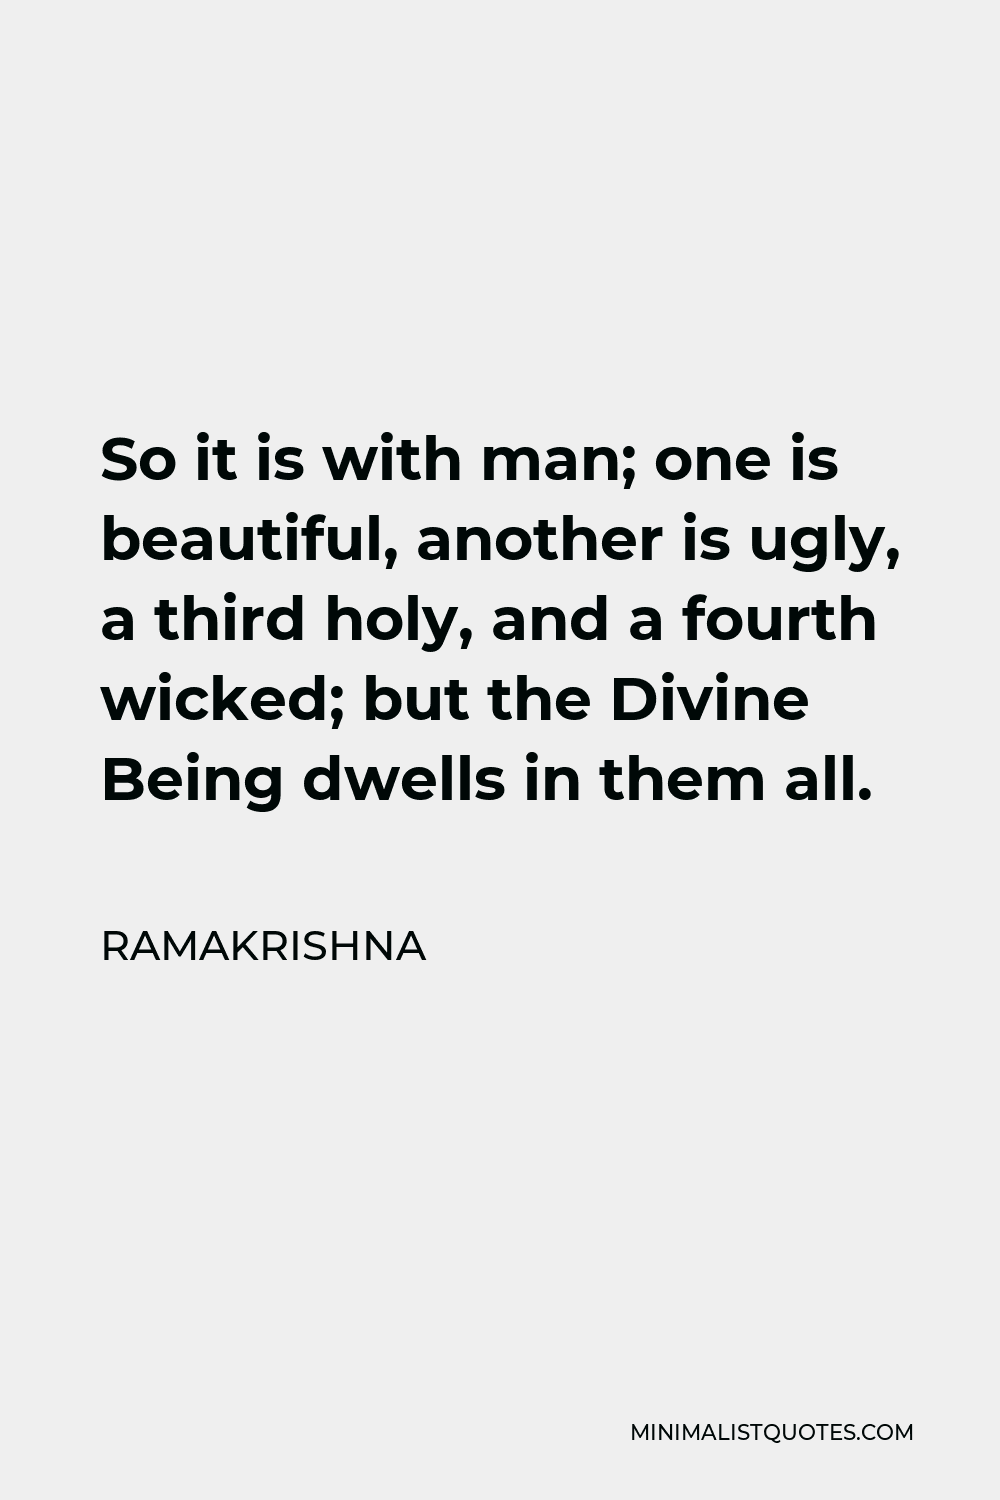 Ramakrishna Quote - So it is with man; one is beautiful, another is ugly, a third holy, and a fourth wicked; but the Divine Being dwells in them all.